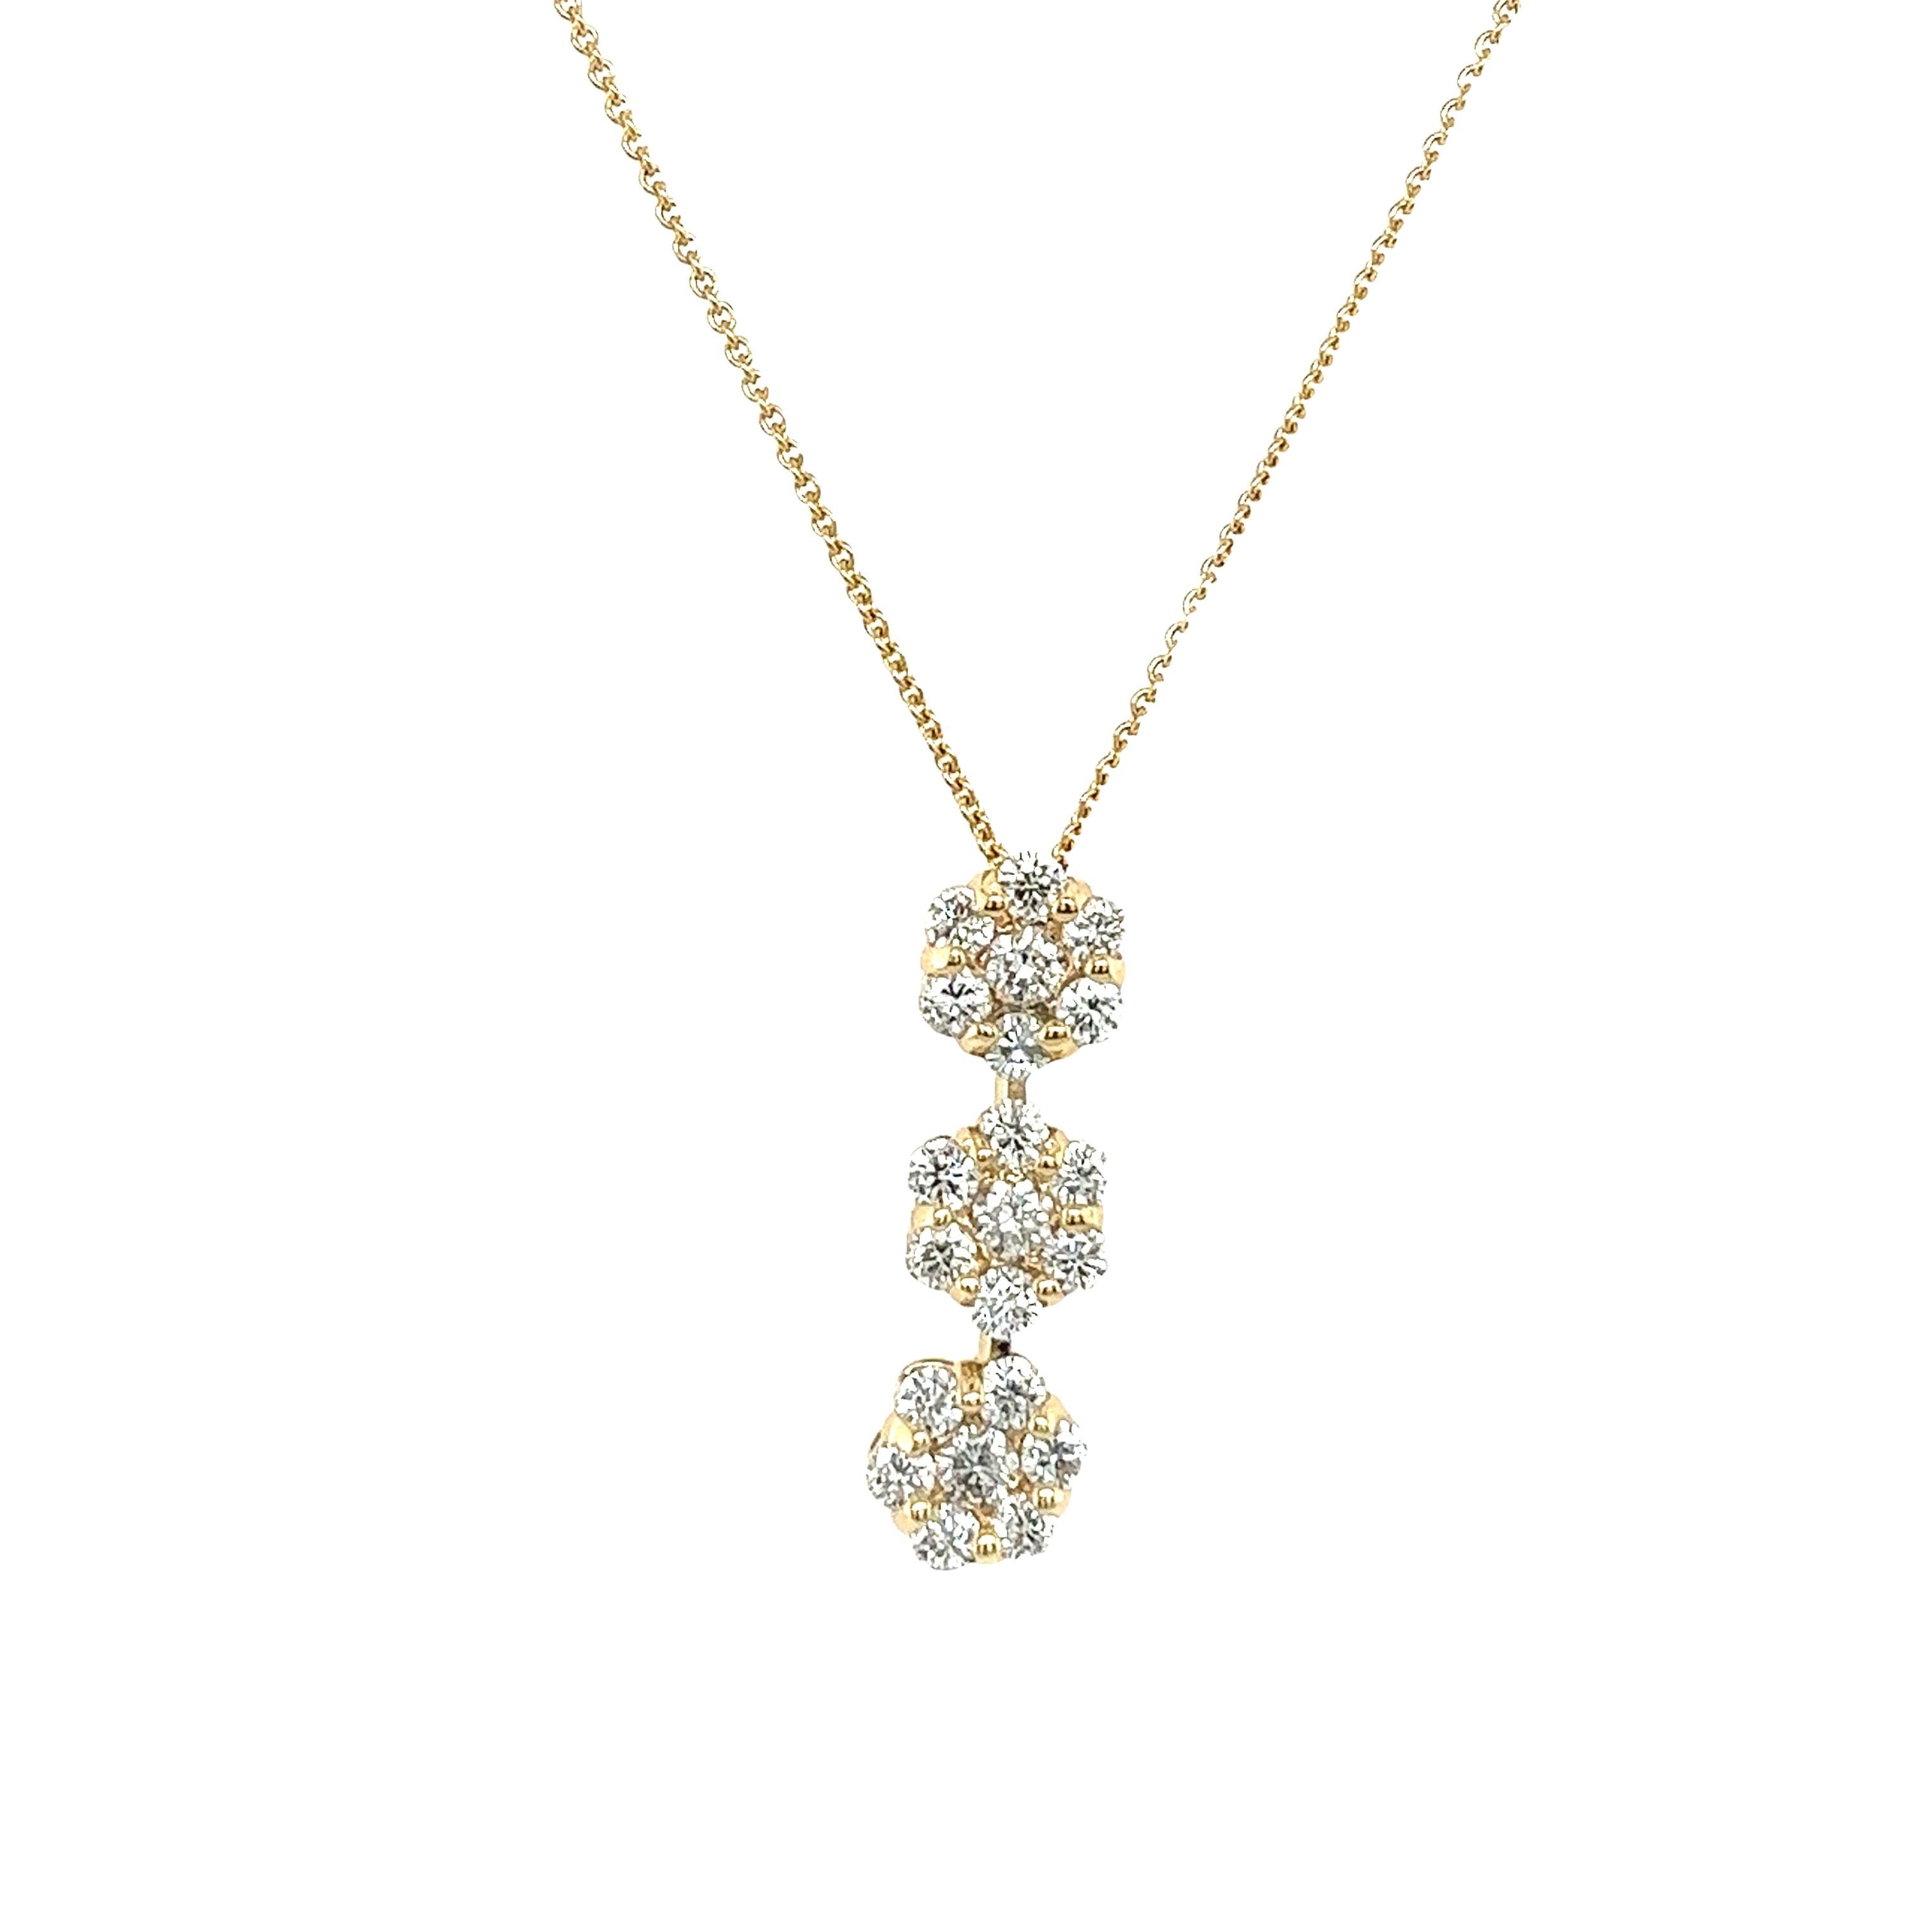 A true embodiment of elegance and sophistication.
This captivating piece showcases a stunning triple cluster diamond pendant with 21 dazzling round brilliant cut diamonds in 14ct yellow gold.This comes with a 14ct yellow gold 18” chain.
Total